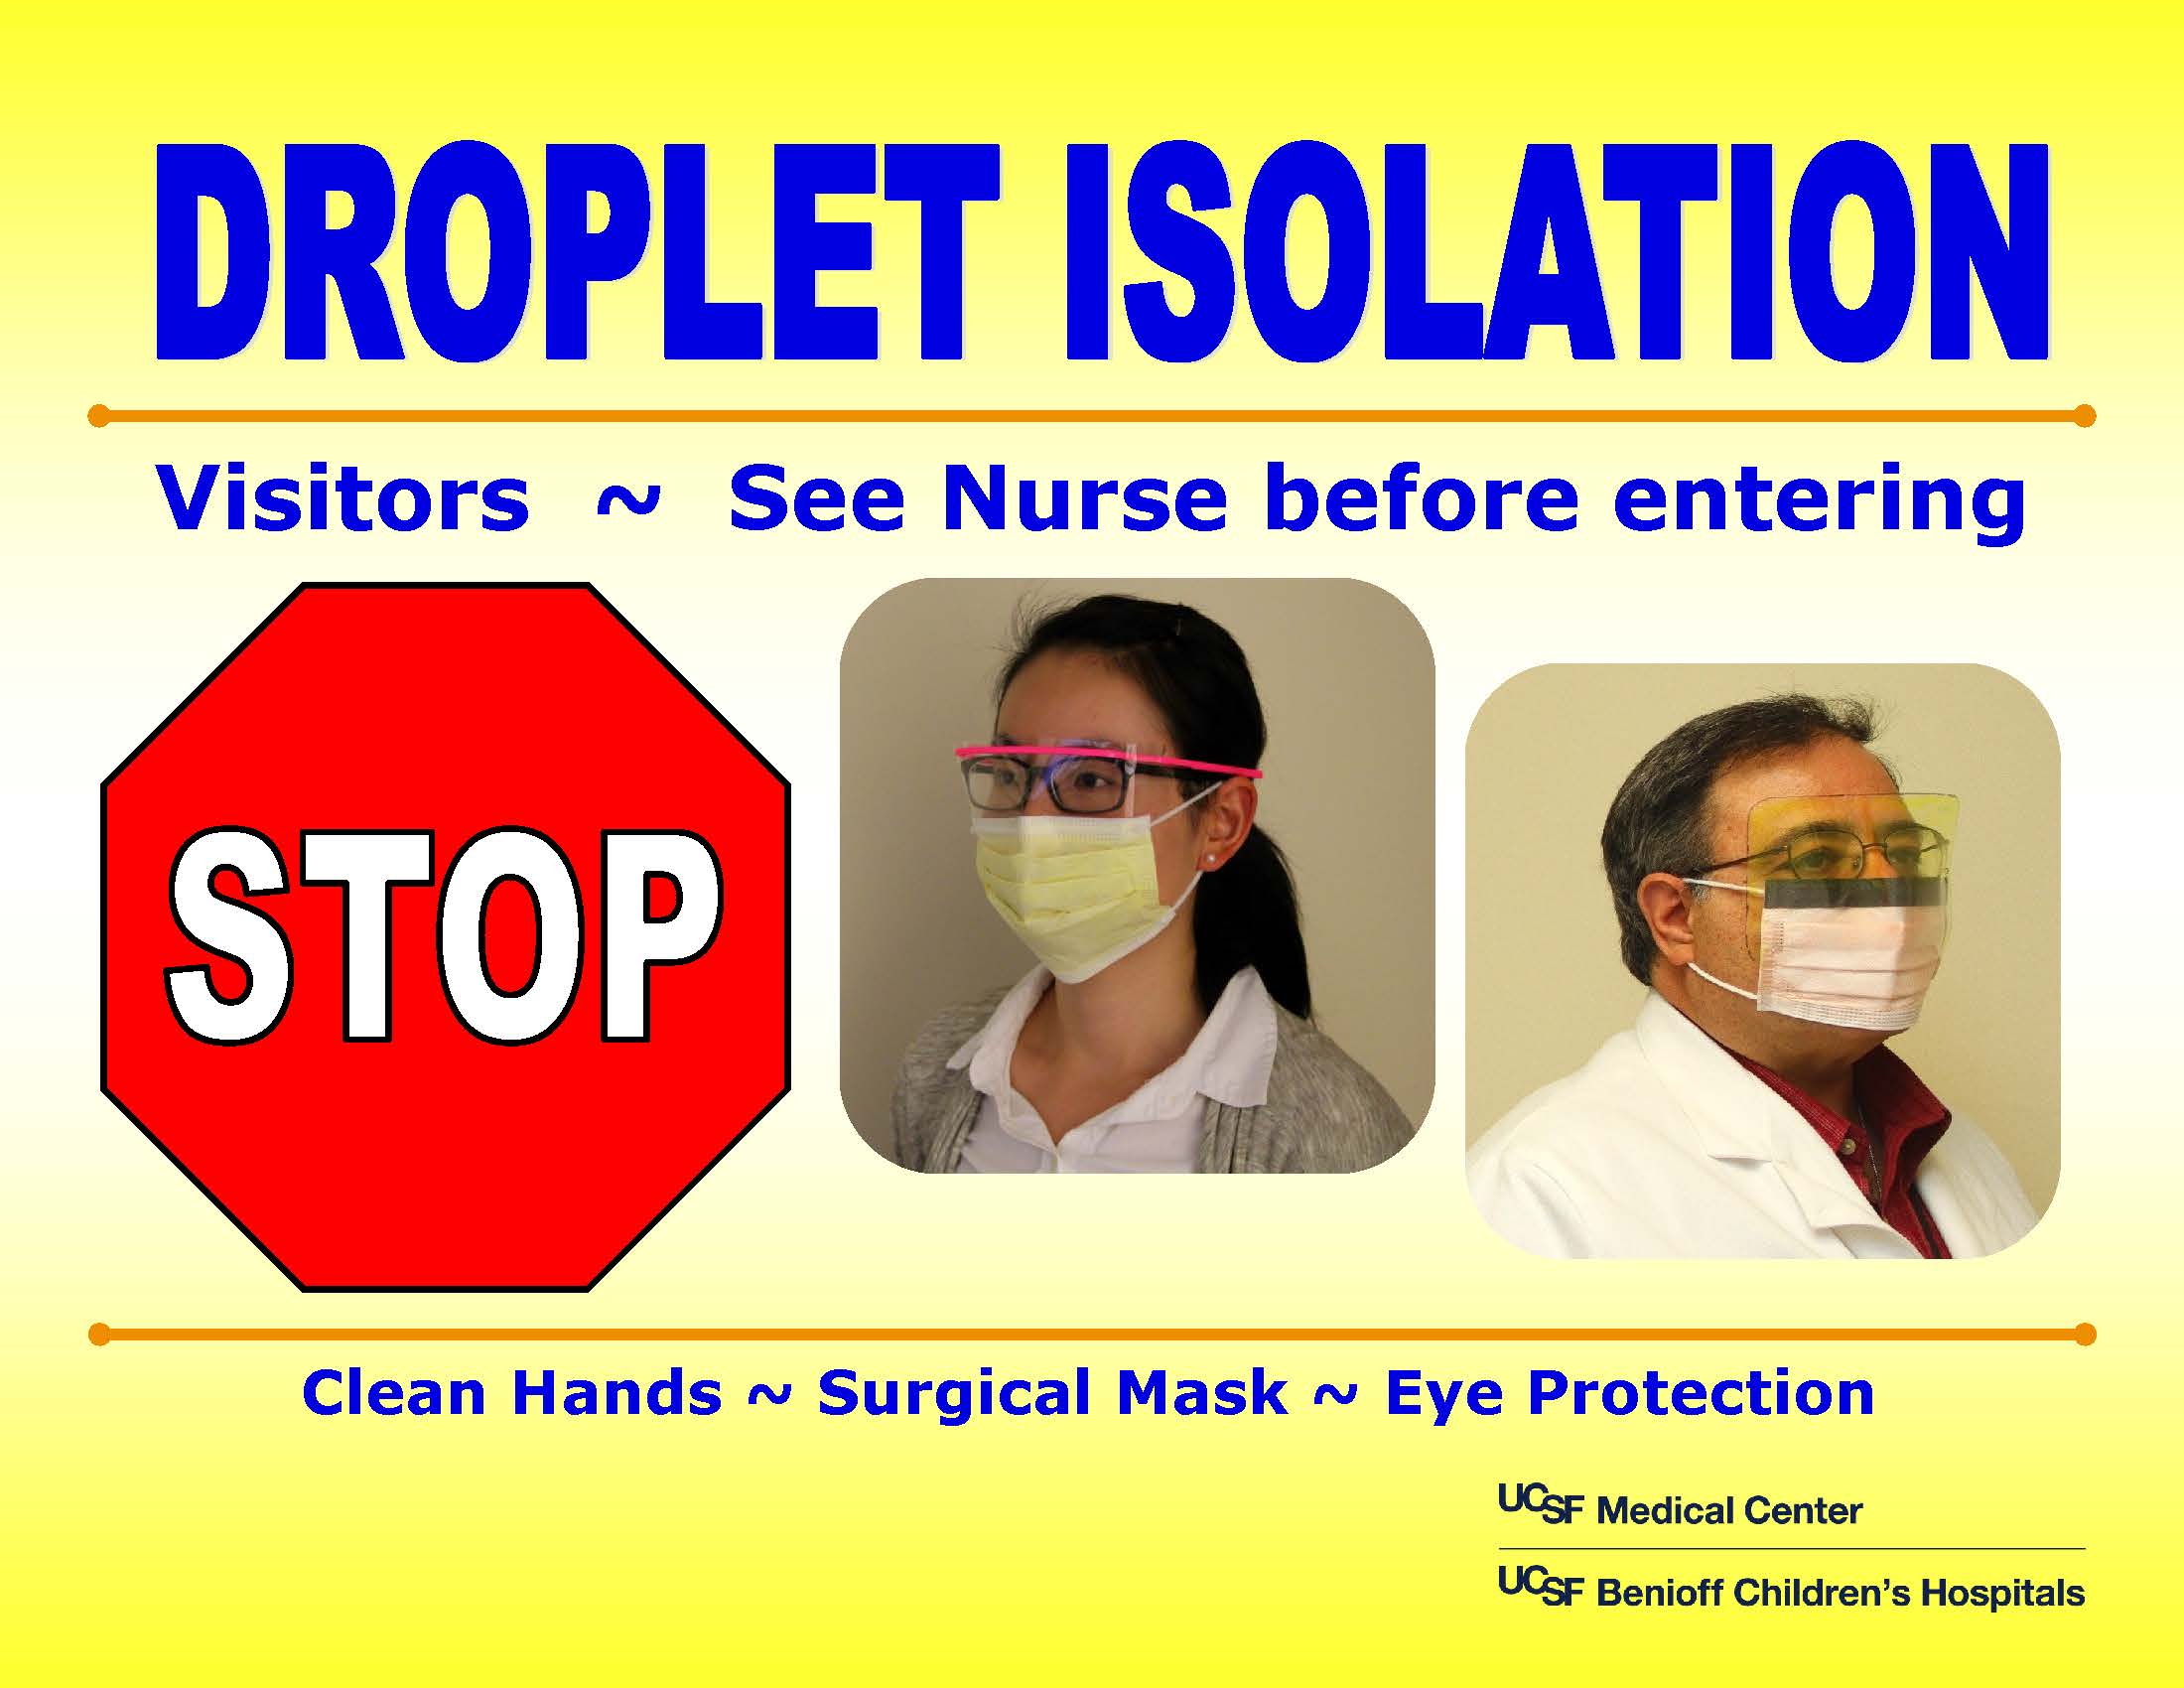 droplet-isolation-sign-ucsf-health-hospital-epidemiology-and